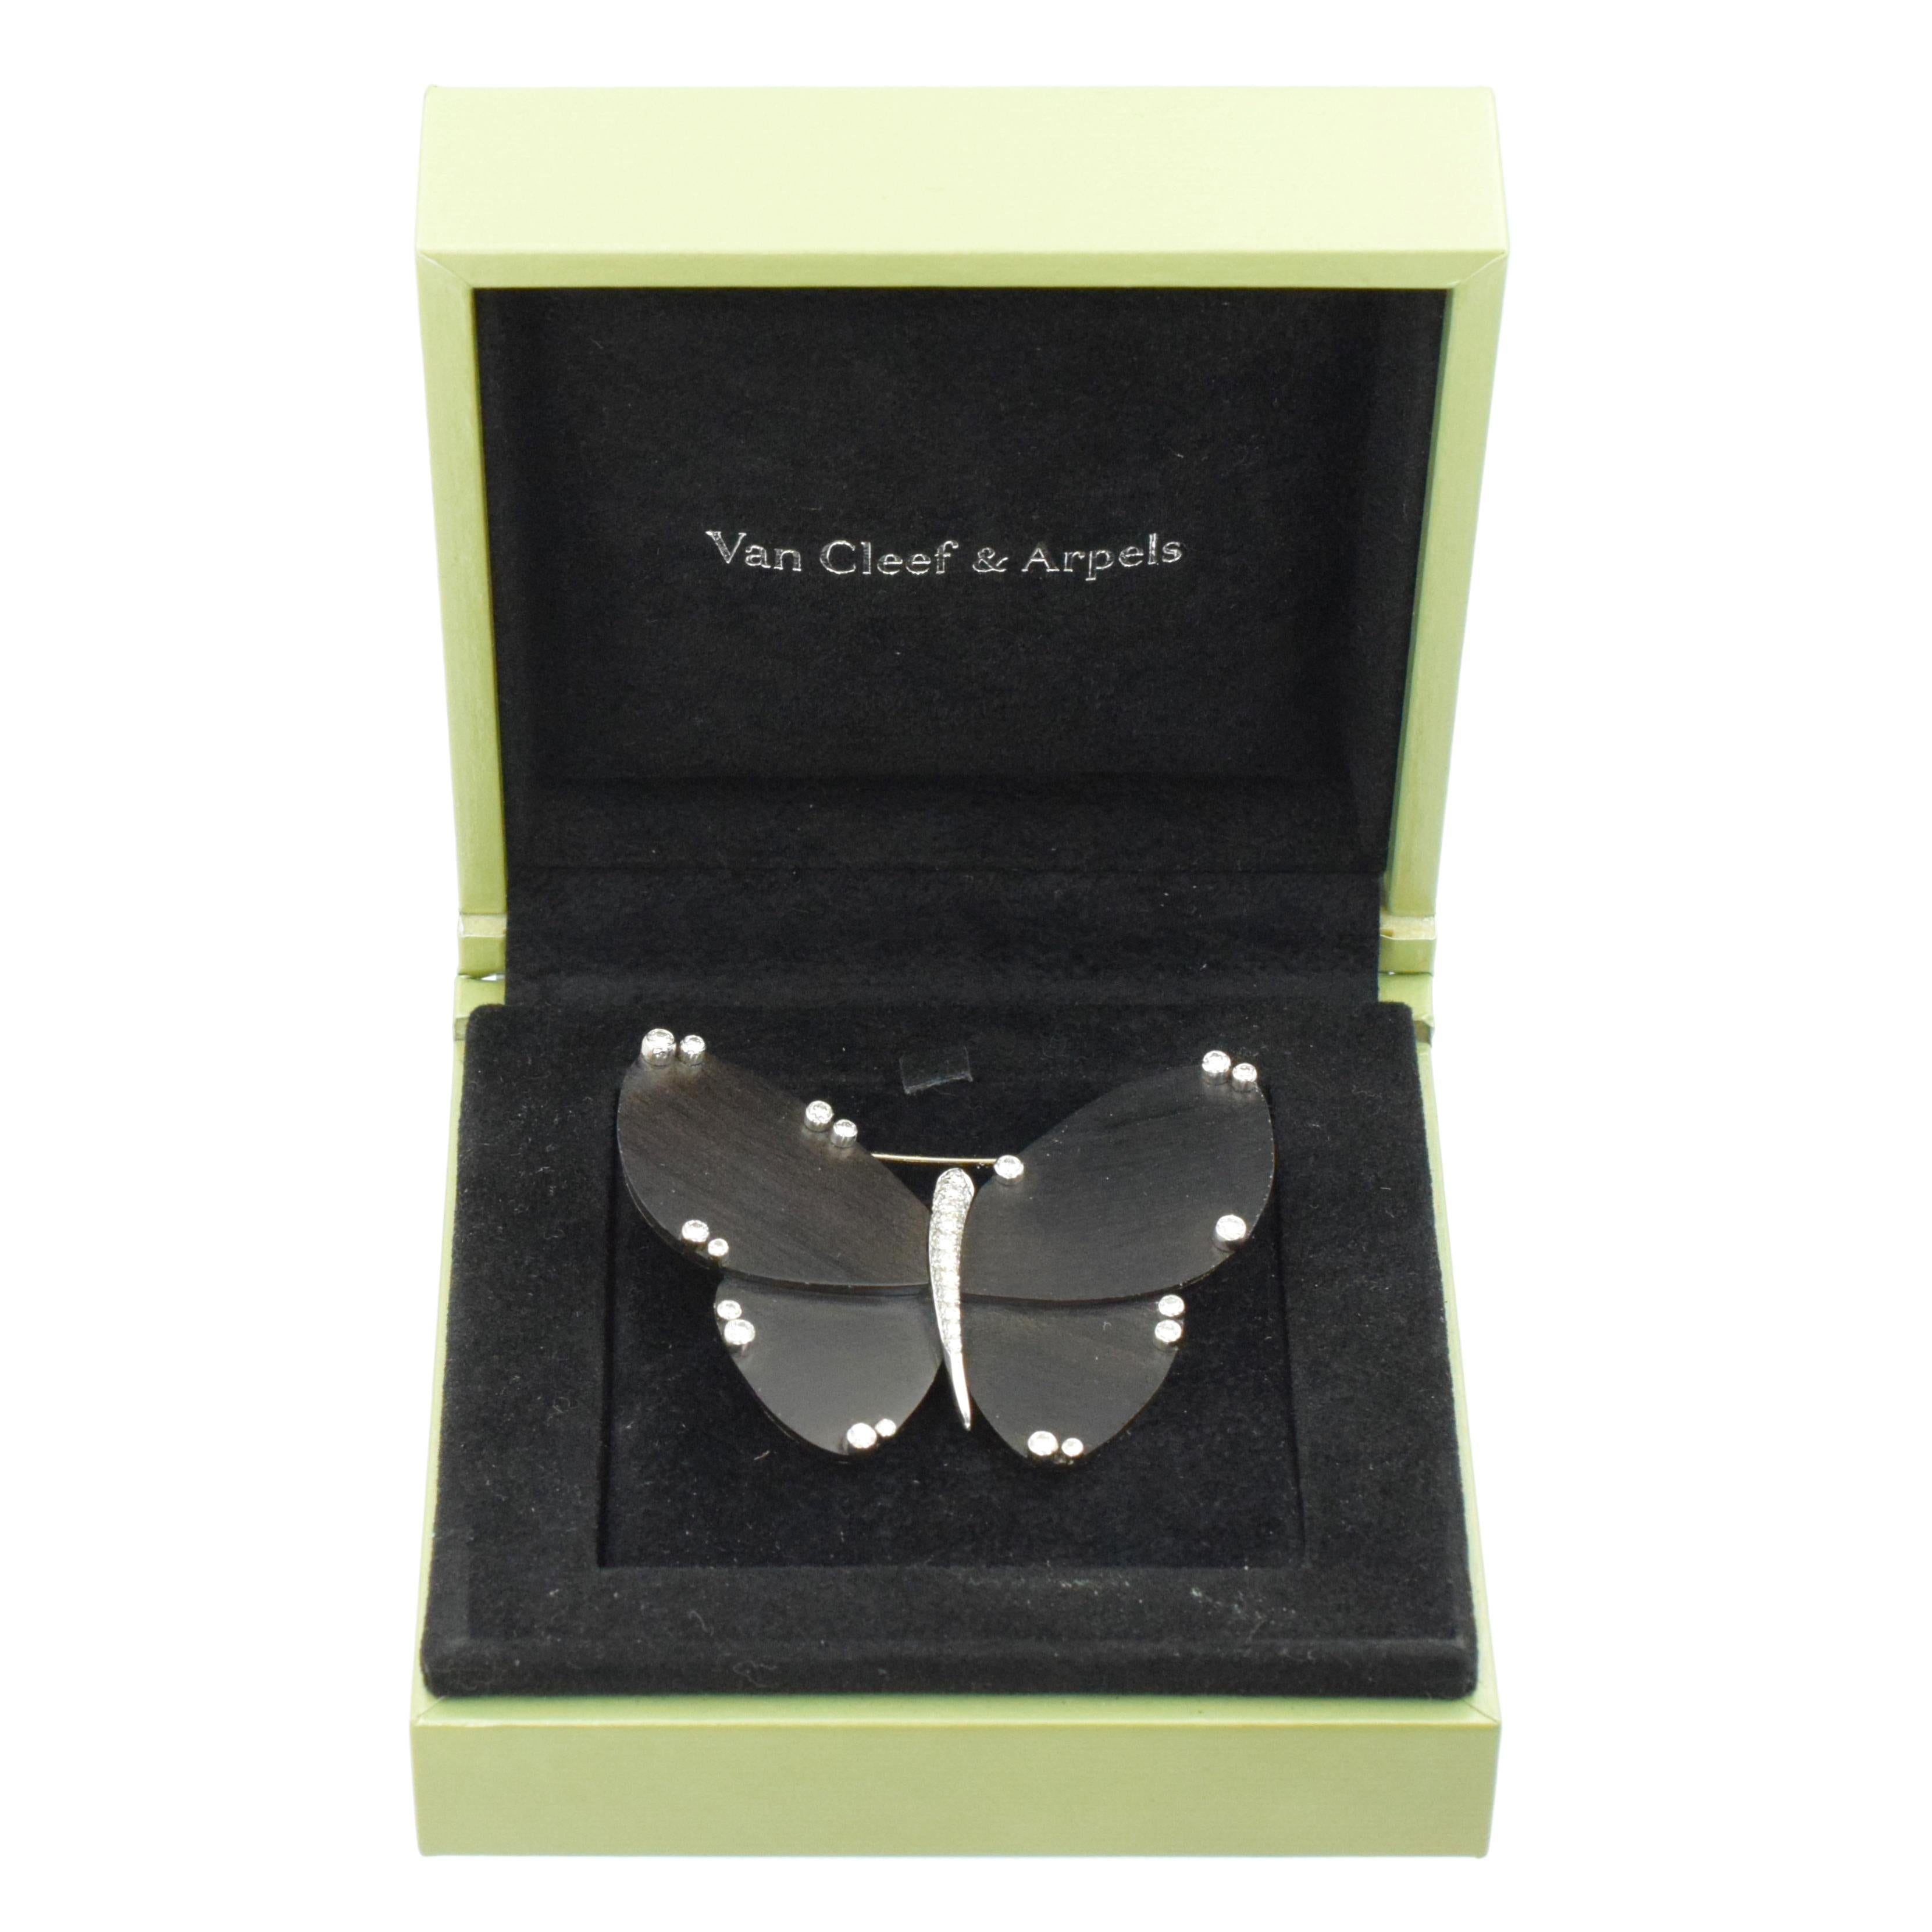 
Van Cleef & Arpels diamond and ebony wood brooch in 18k white gold. The wings made of ebony wood panels, accented by scattered around the edges bezel set round brilliant cut diamonds and pave set with round brilliant cut diamonds body. 
Signed: VCA